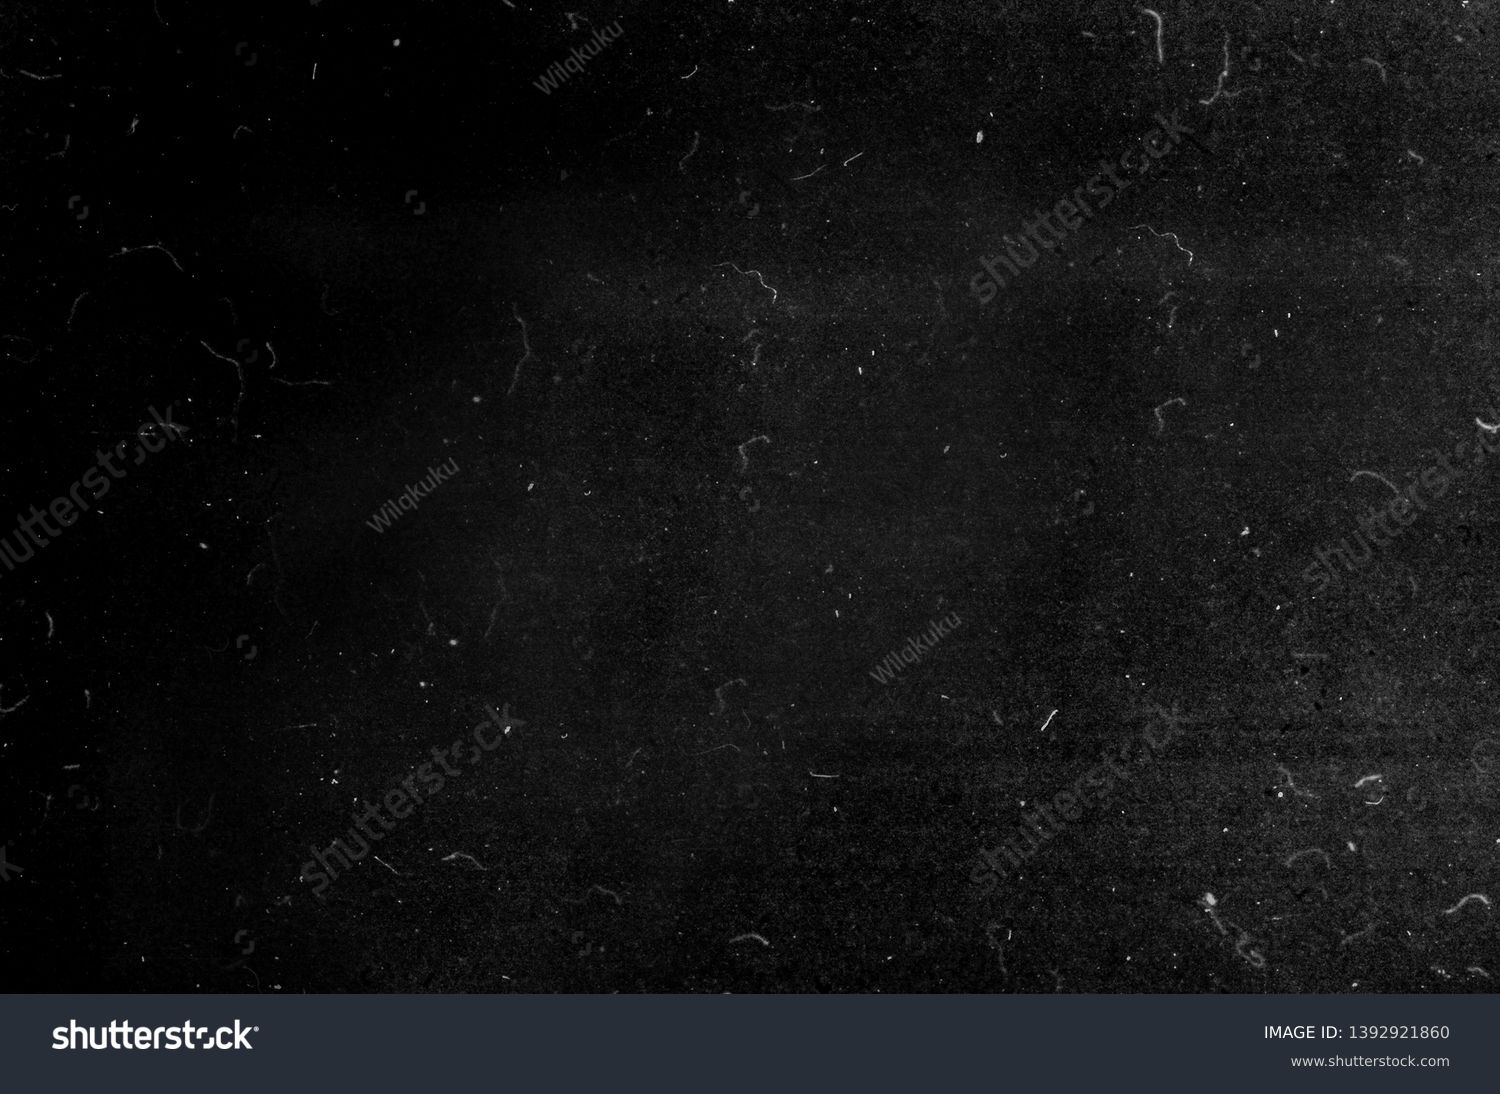 Black grunge scratched background, old film effect, dusty scary texture #1392921860